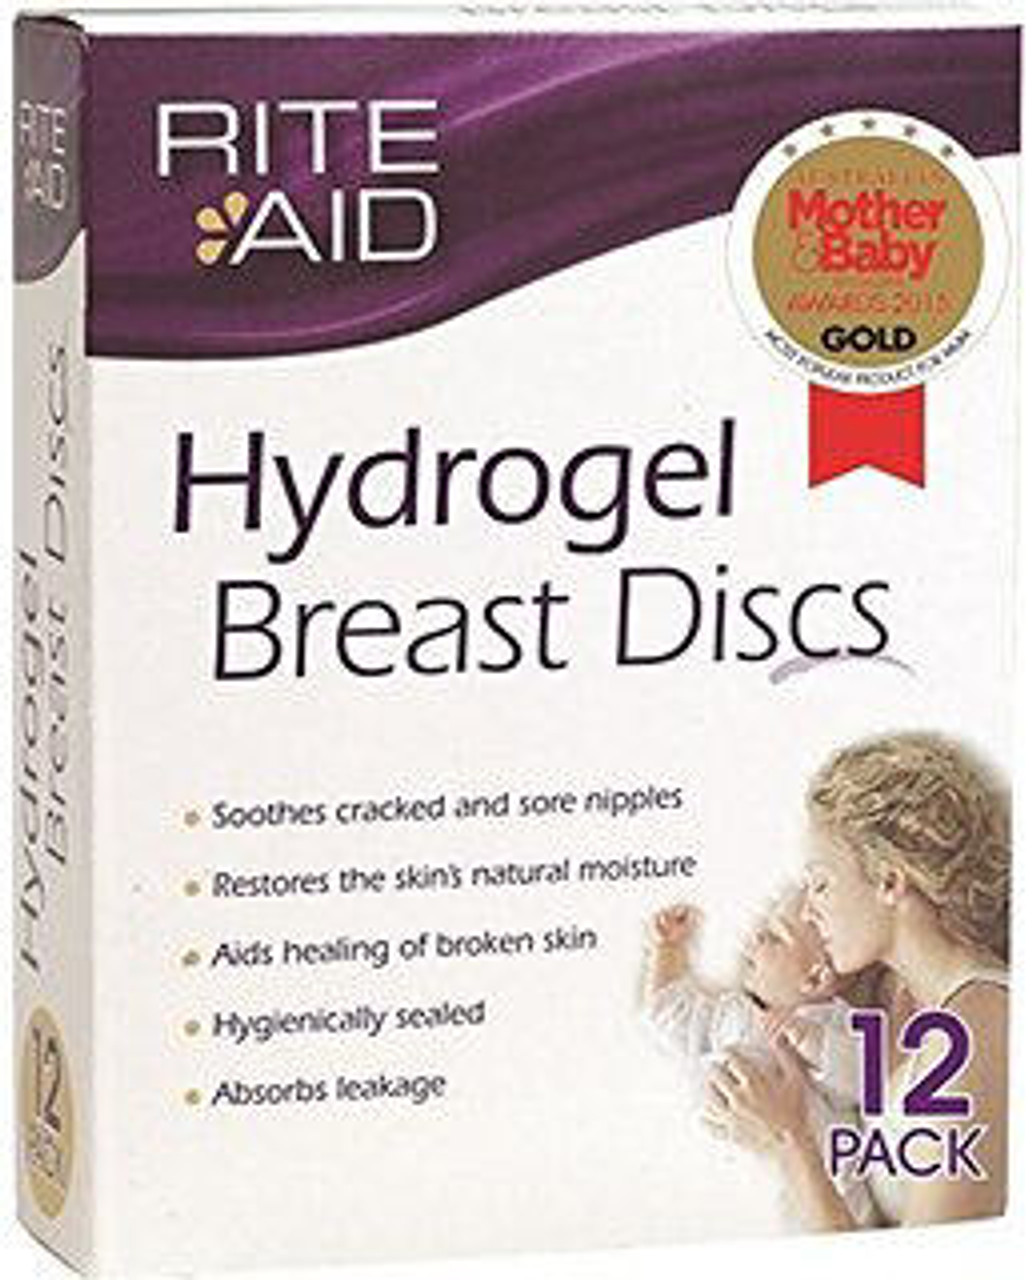 https://cdn11.bigcommerce.com/s-f8566/images/stencil/1280x1280/products/1374/1746/Rite-Aid-Hydrogel-Breast-Pads-12__94303.1471251134.jpg?c=2